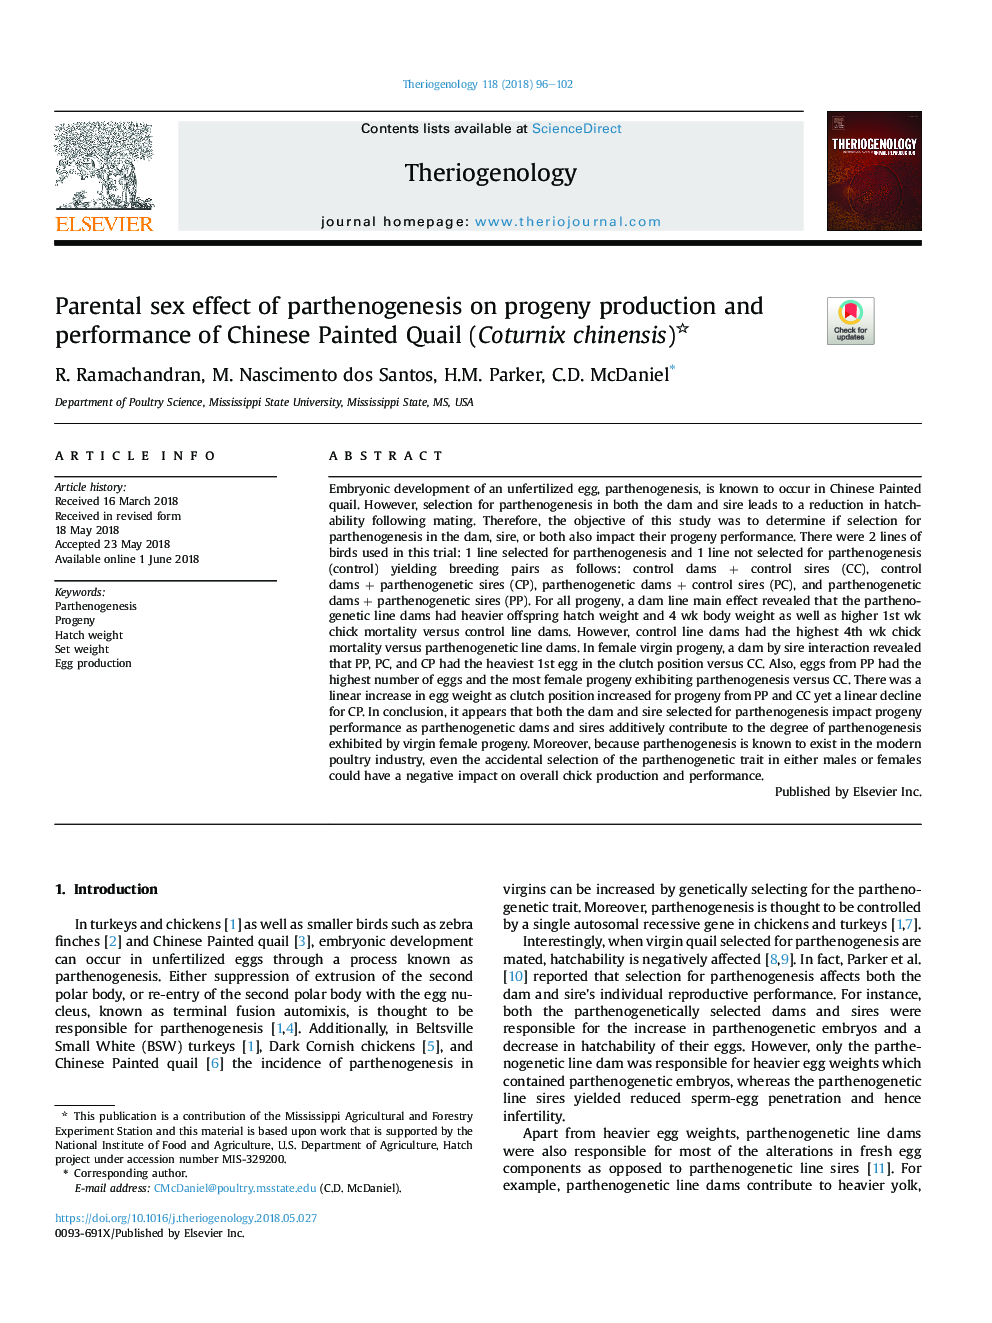 Parental sex effect of parthenogenesis on progeny production and performance of Chinese Painted Quail (Coturnix chinensis)